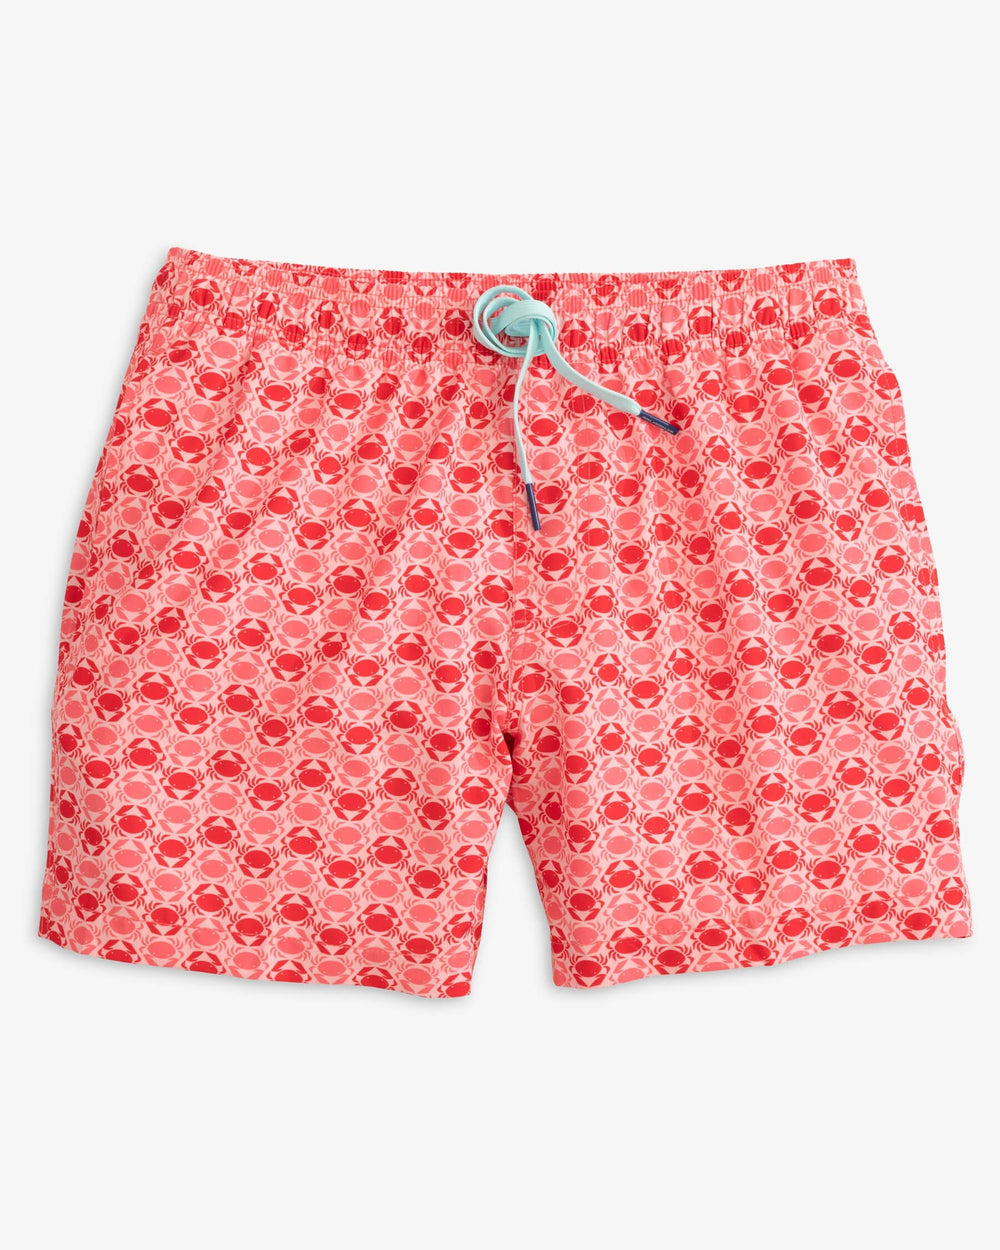 The front view of the Southern Tide Why So Crabby Printed Swim Trunk by Southern Tide - Rose Blush